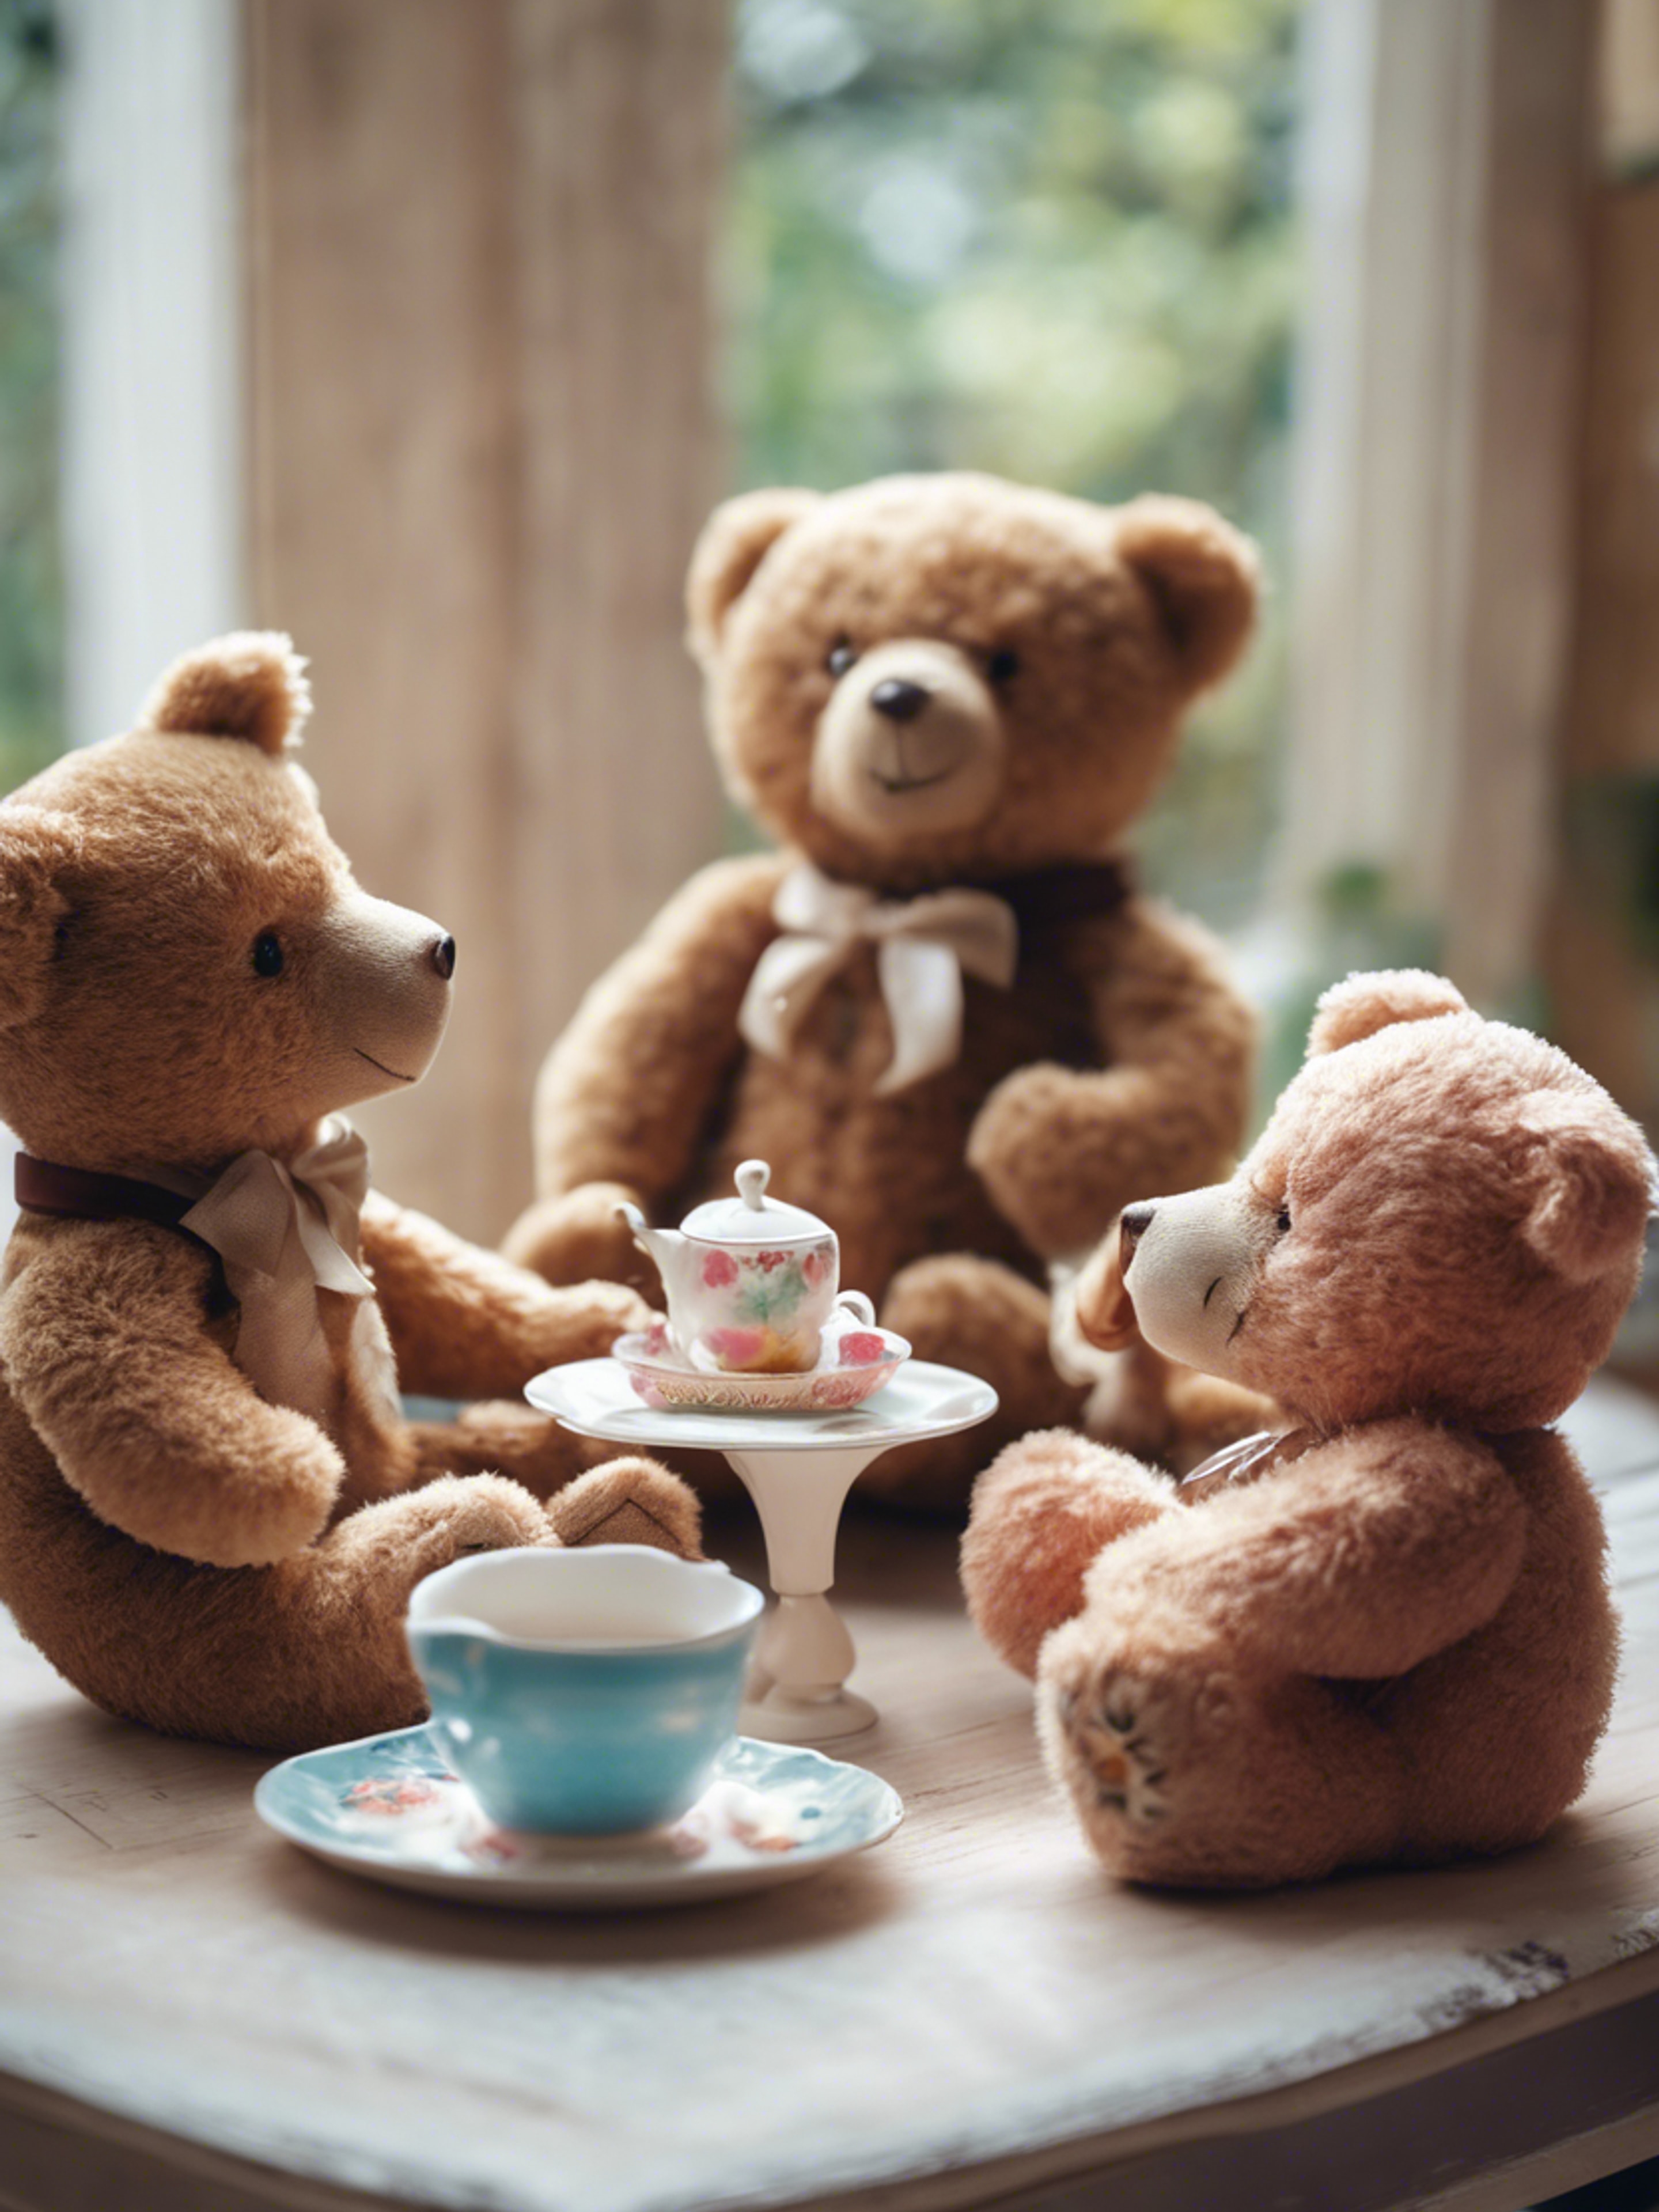 A group of teddy bears having a playful tea party in a child's room. Тапет[5c3b9dbbb3984ccebf50]